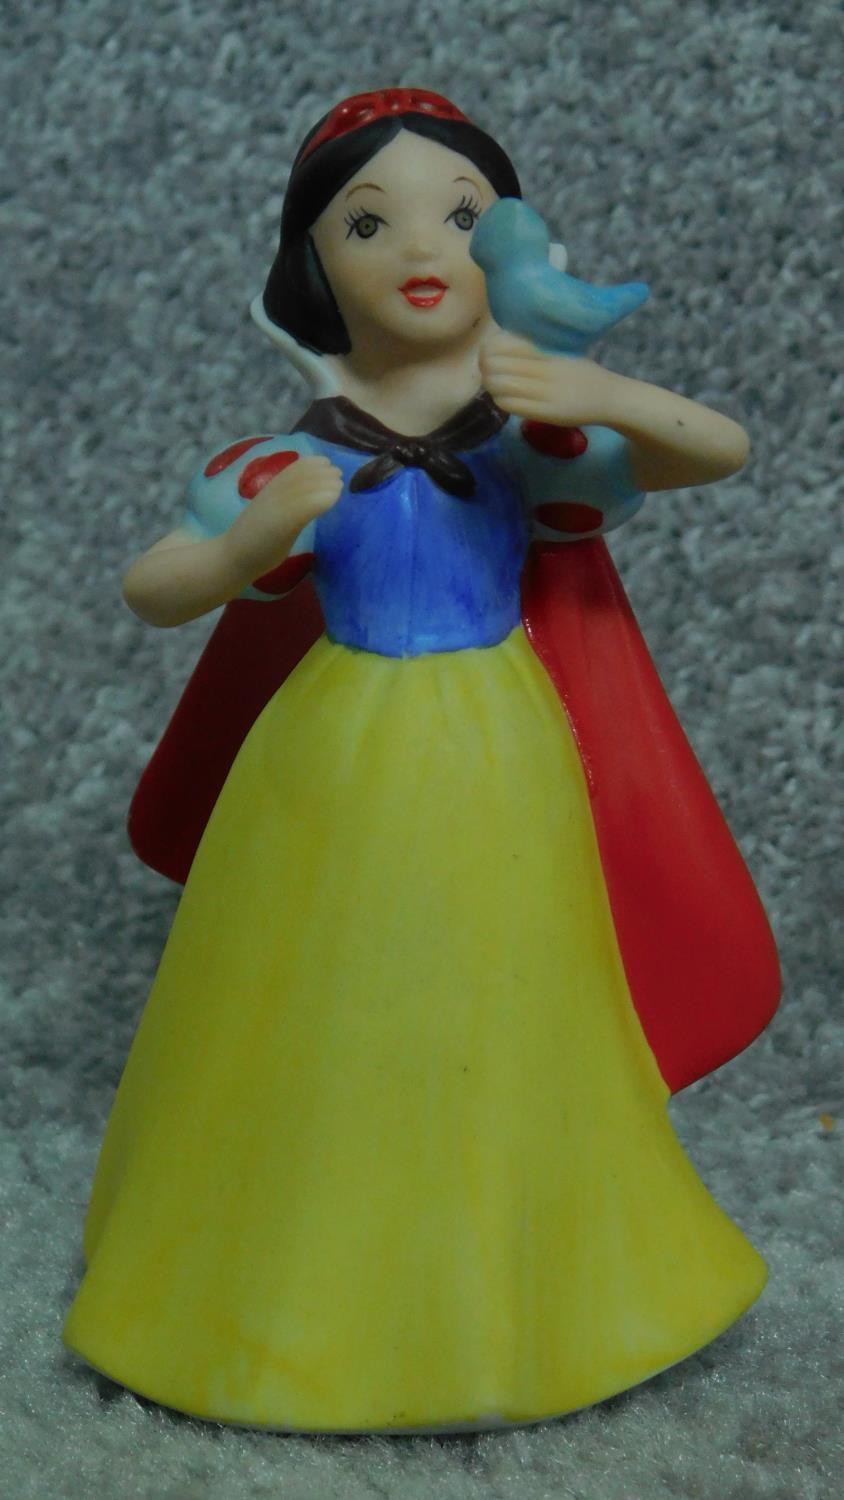 A collection of porcelain hand painted figures of Snow White and the seven dwarves by Schmid for The - Image 9 of 10